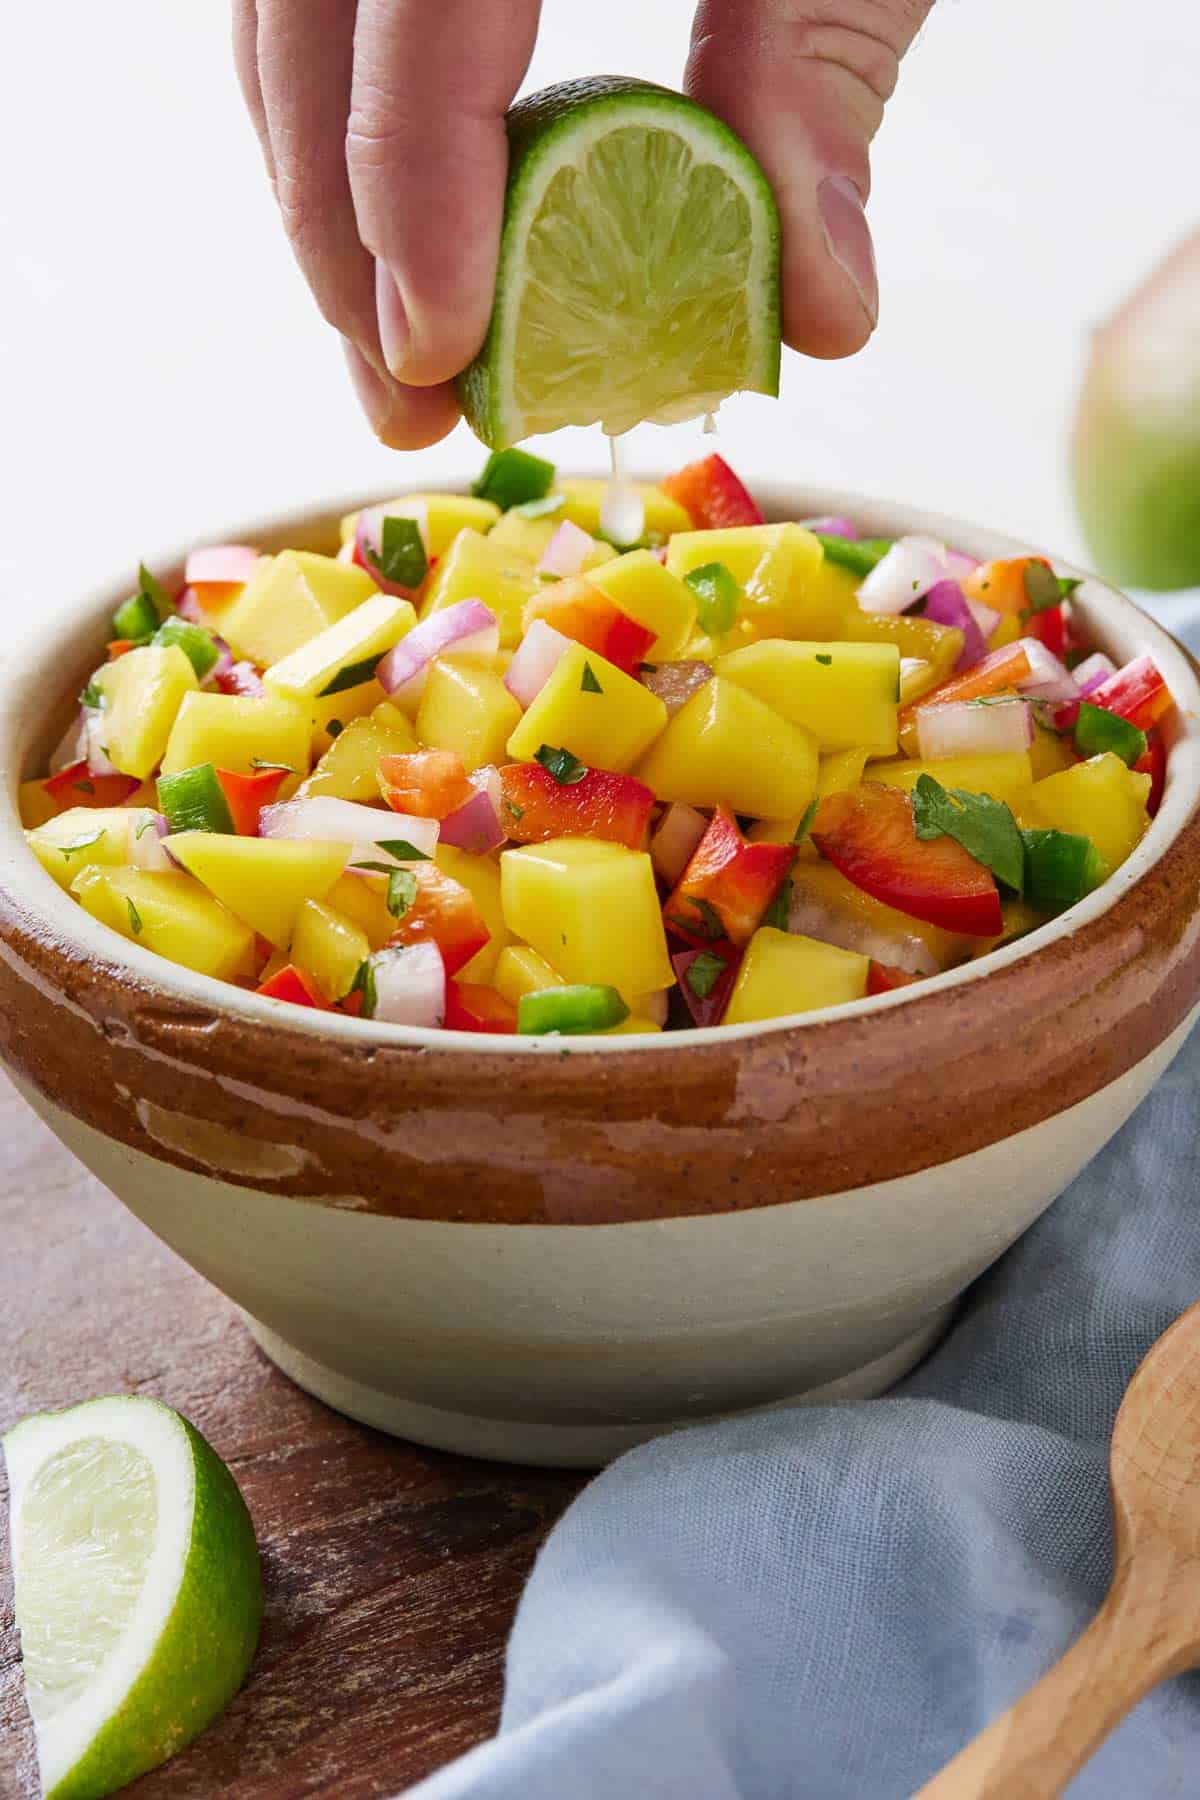 Lime being squeezed overtop of a bowl of mango salsa.